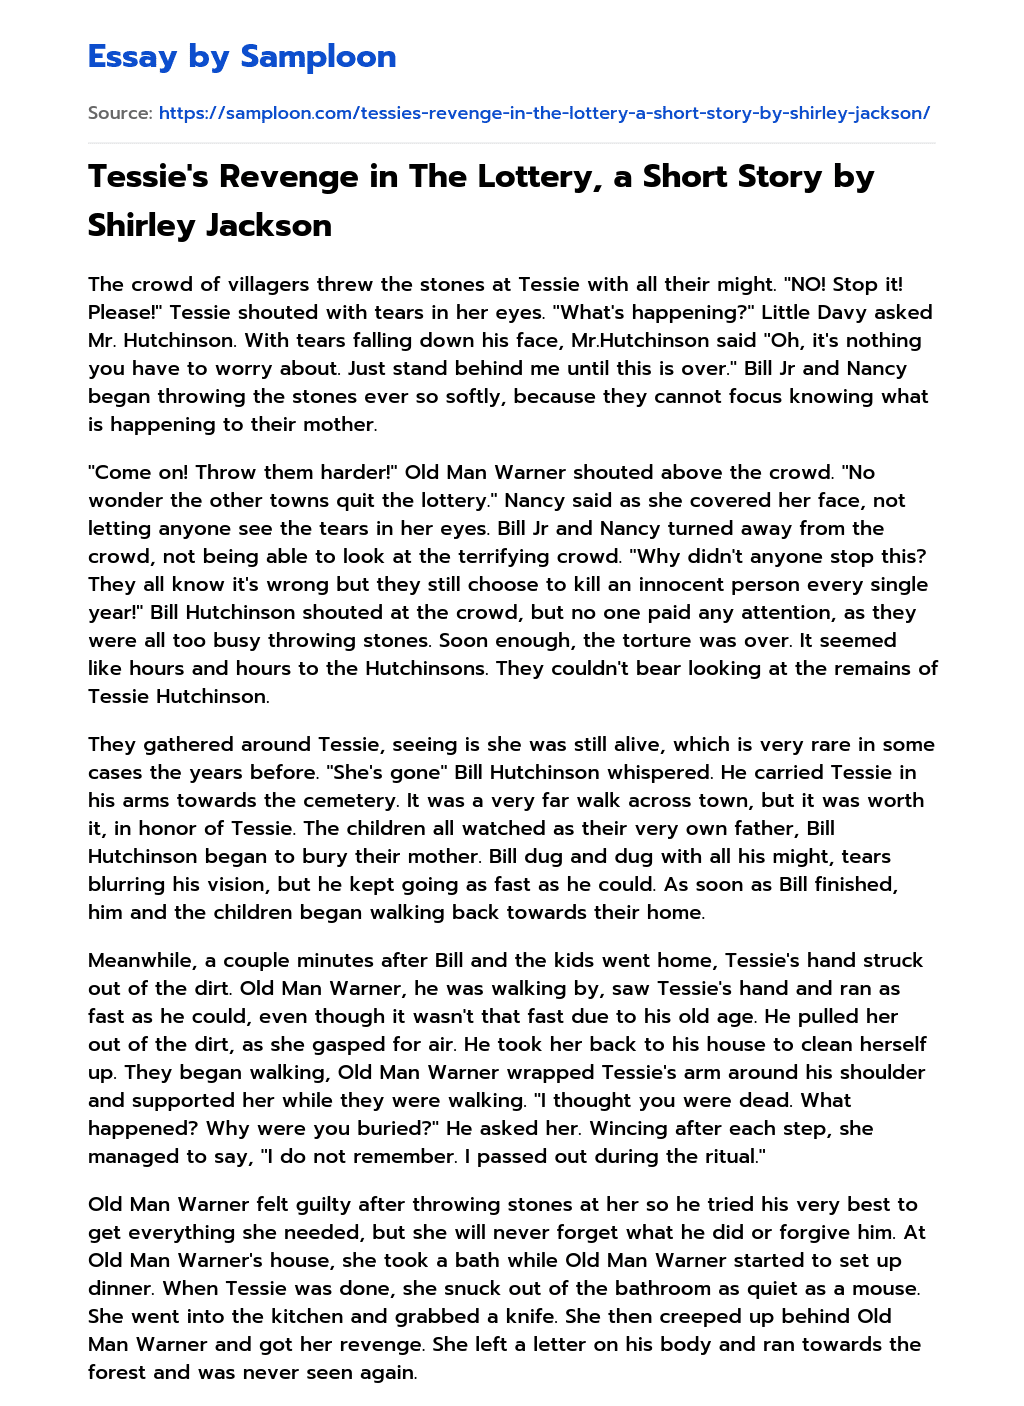 Tessie’s Revenge in The Lottery, a Short Story by Shirley Jackson essay